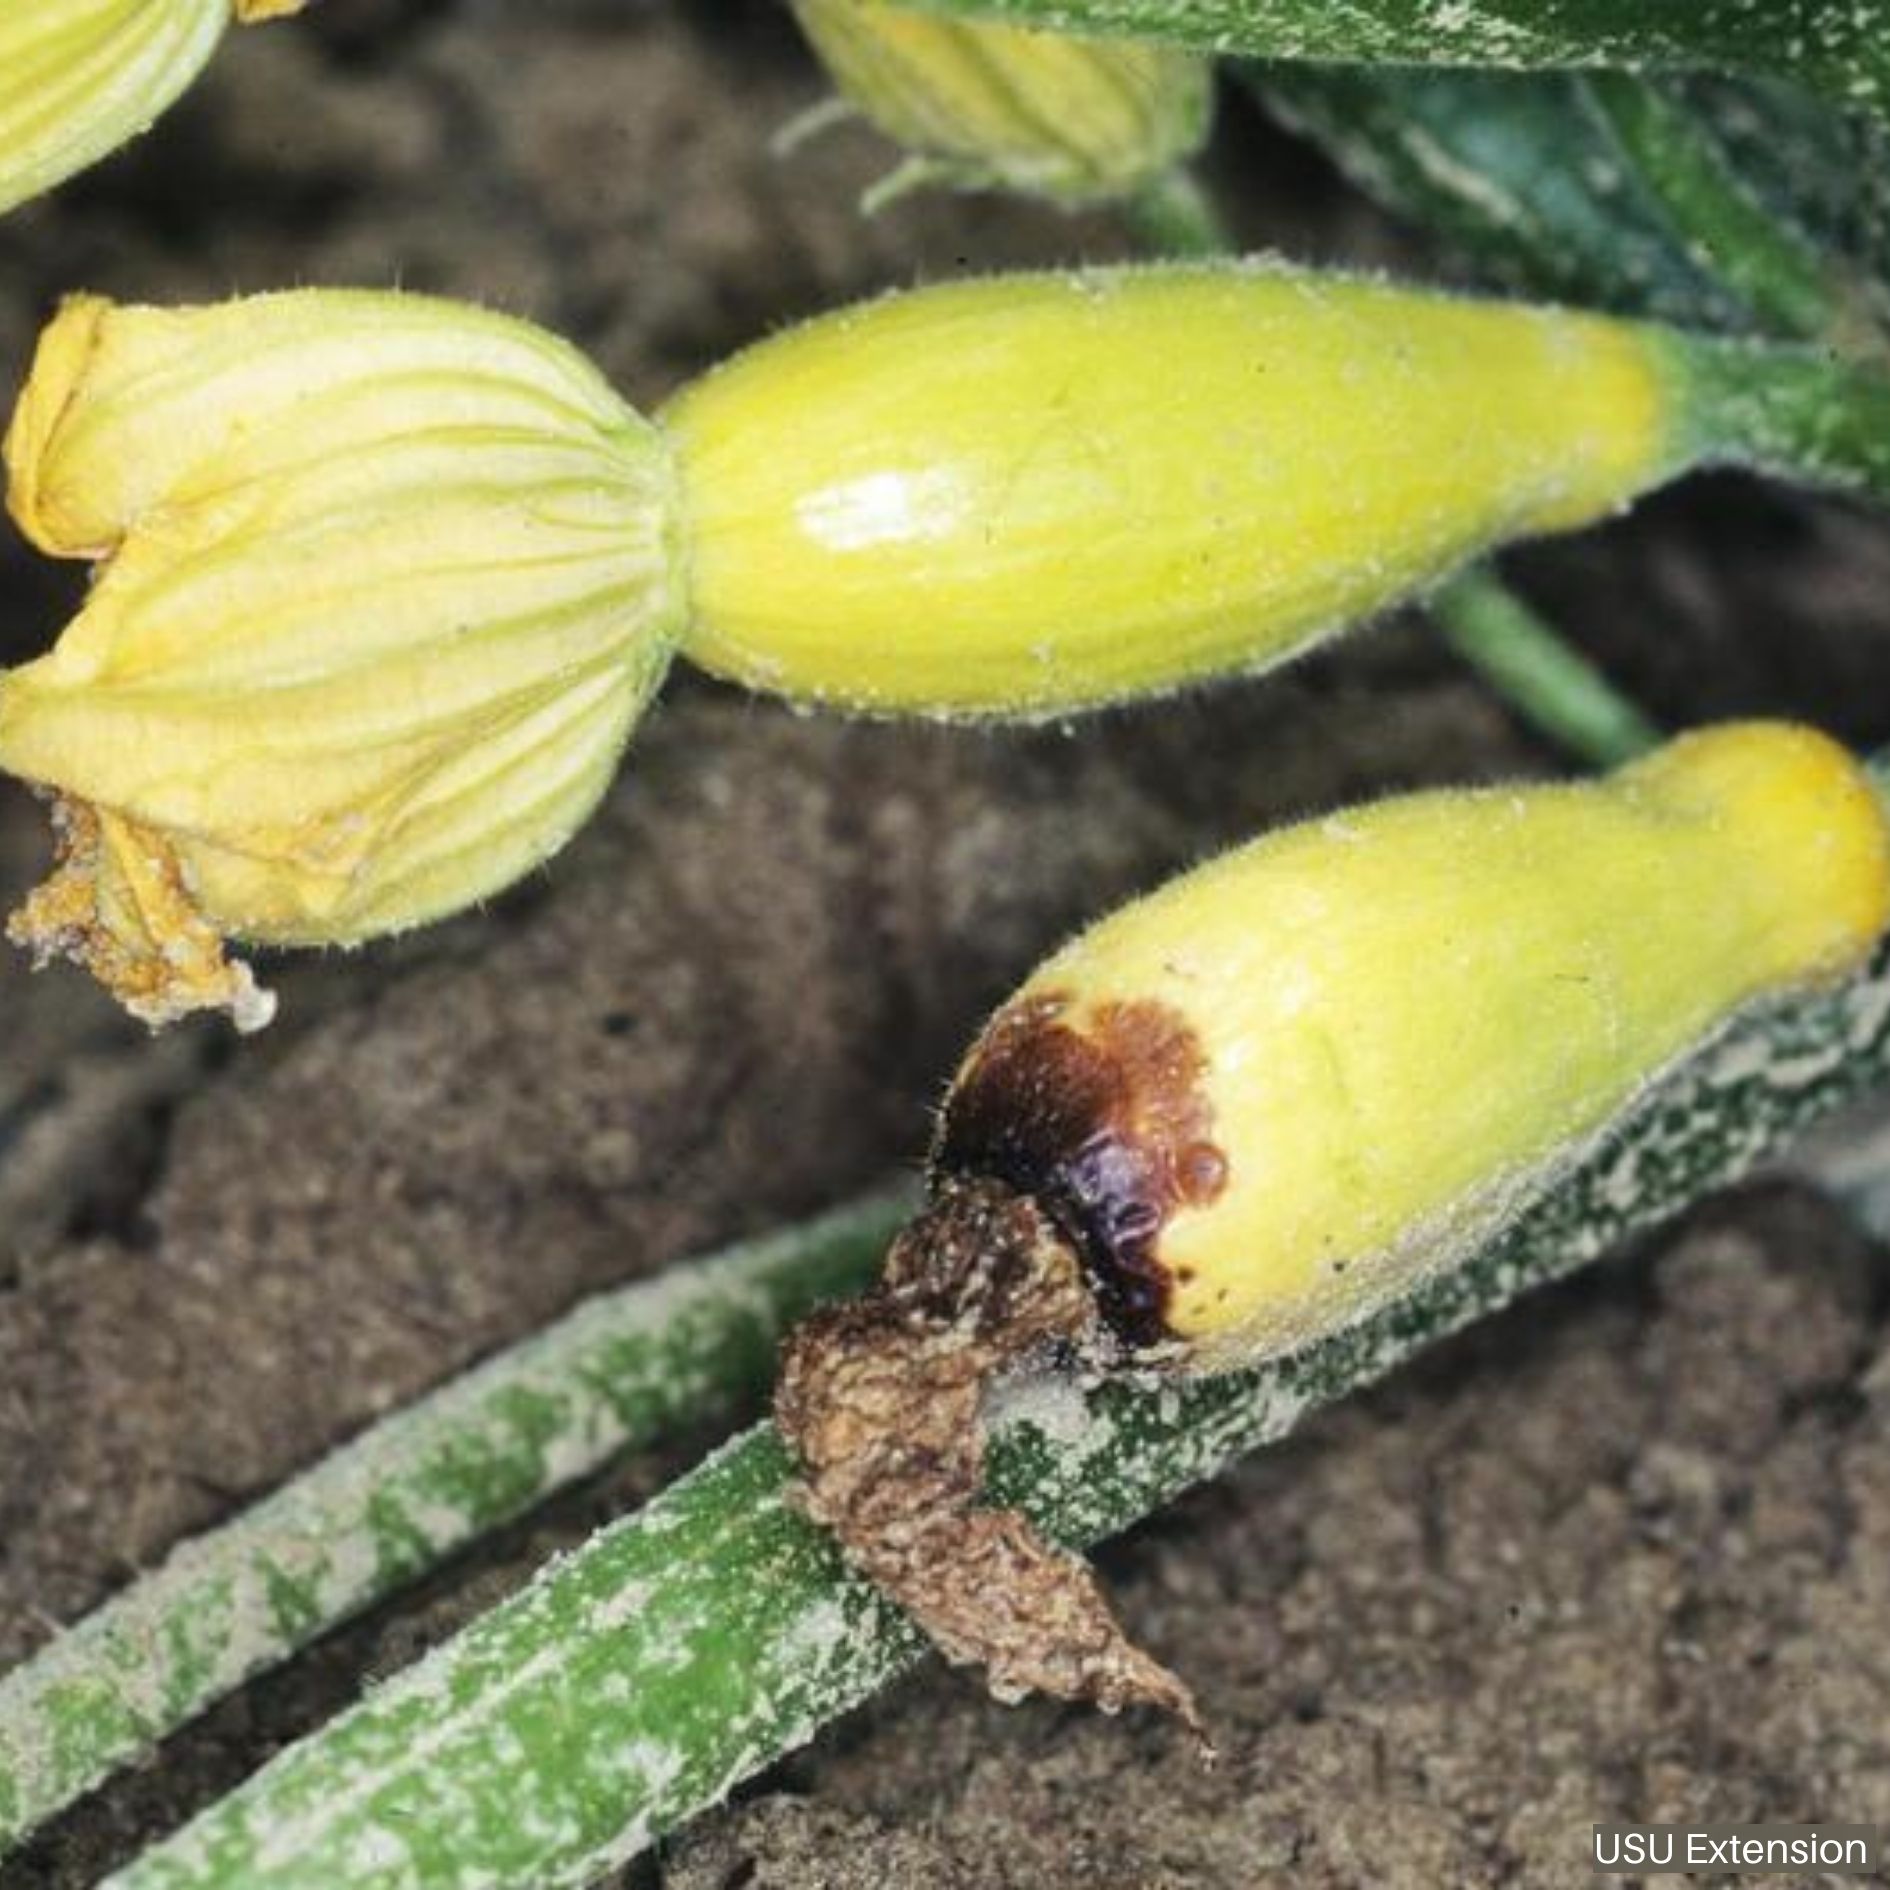 Squash with Blossom End Rot